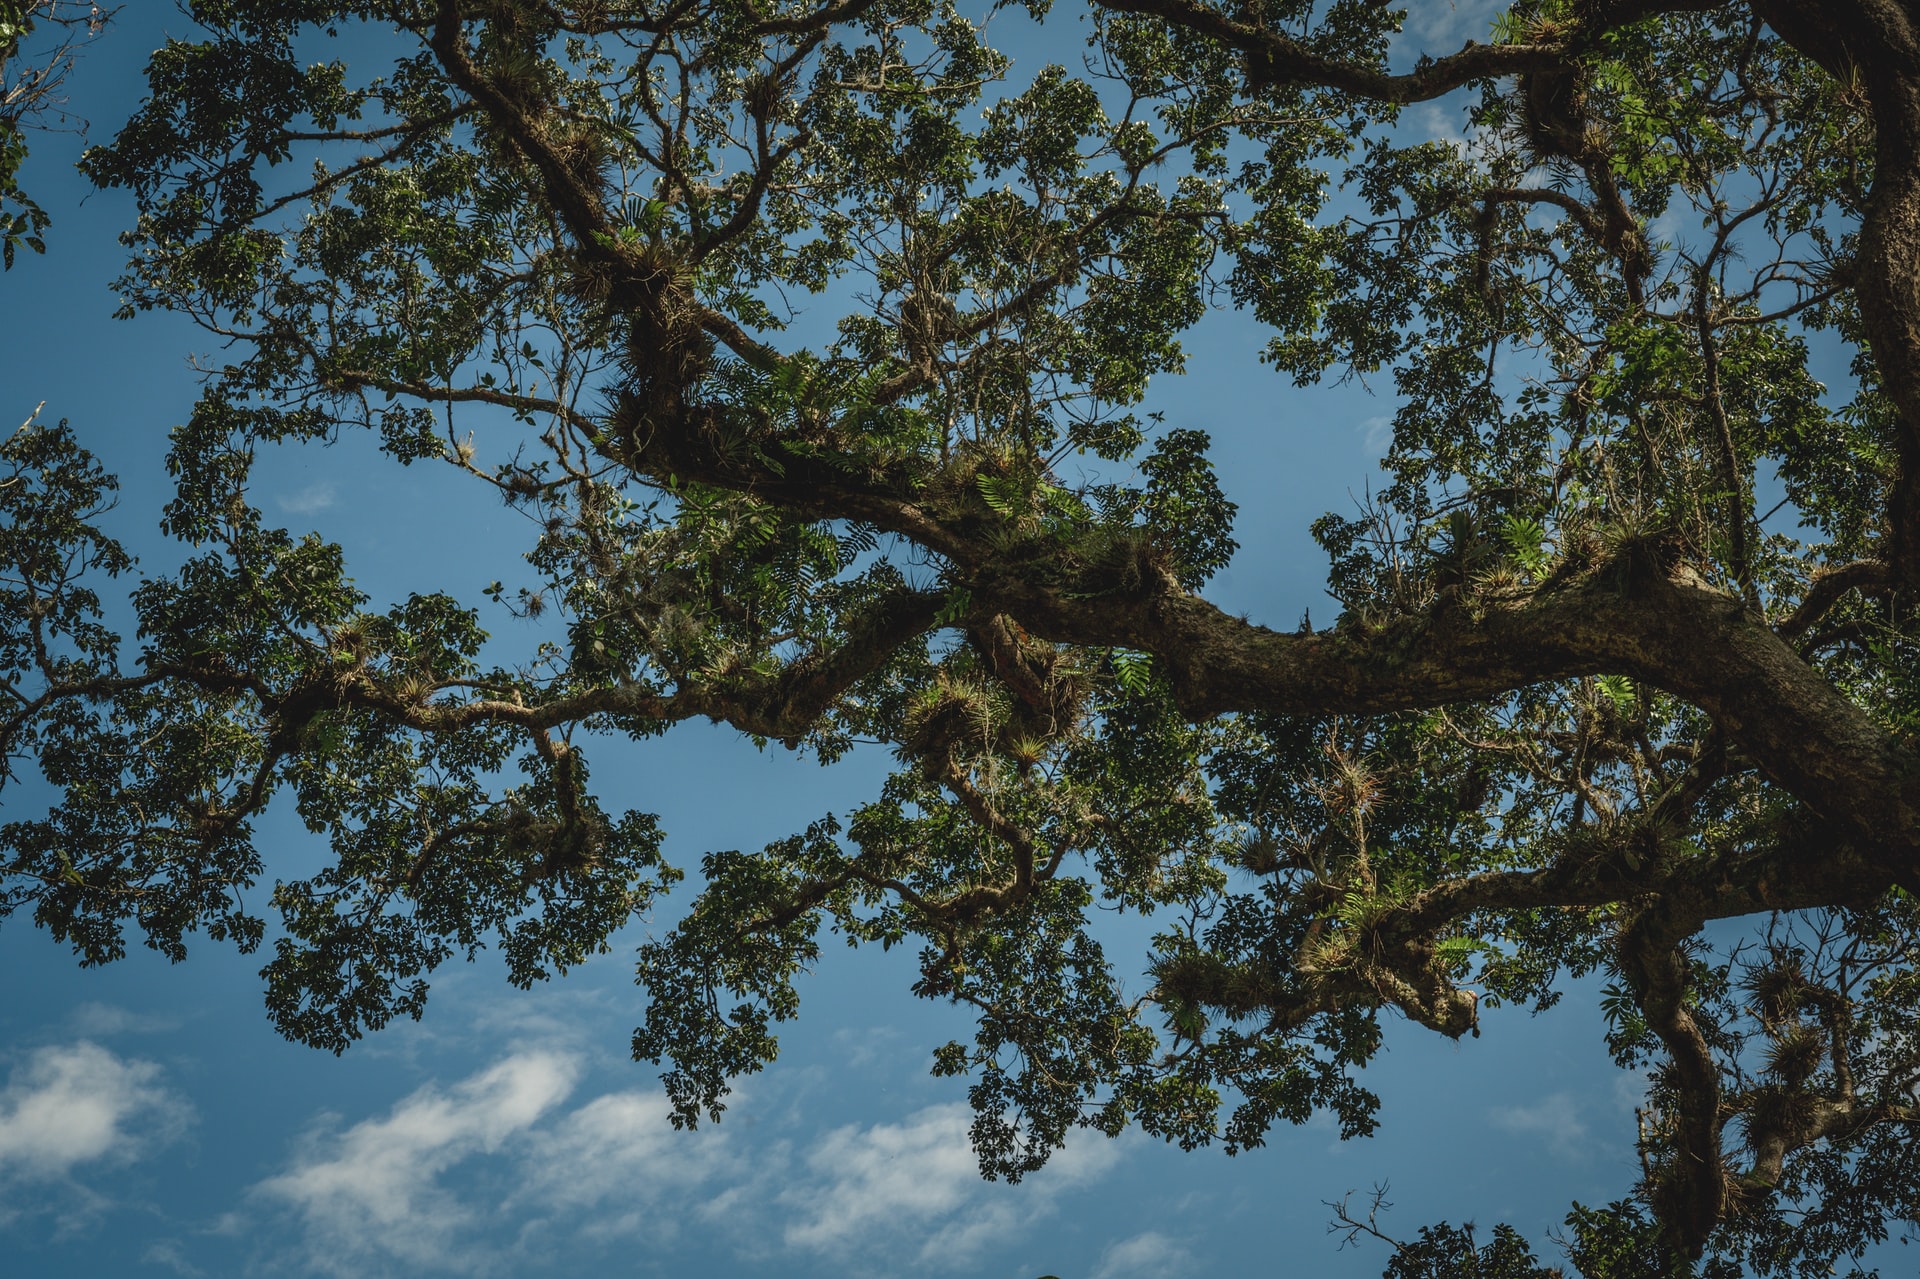 The results are the first to emerge from a new outdoor experiment led by the University of Birmingham in which an old oak forest is bathed in elevated CO2 levels.